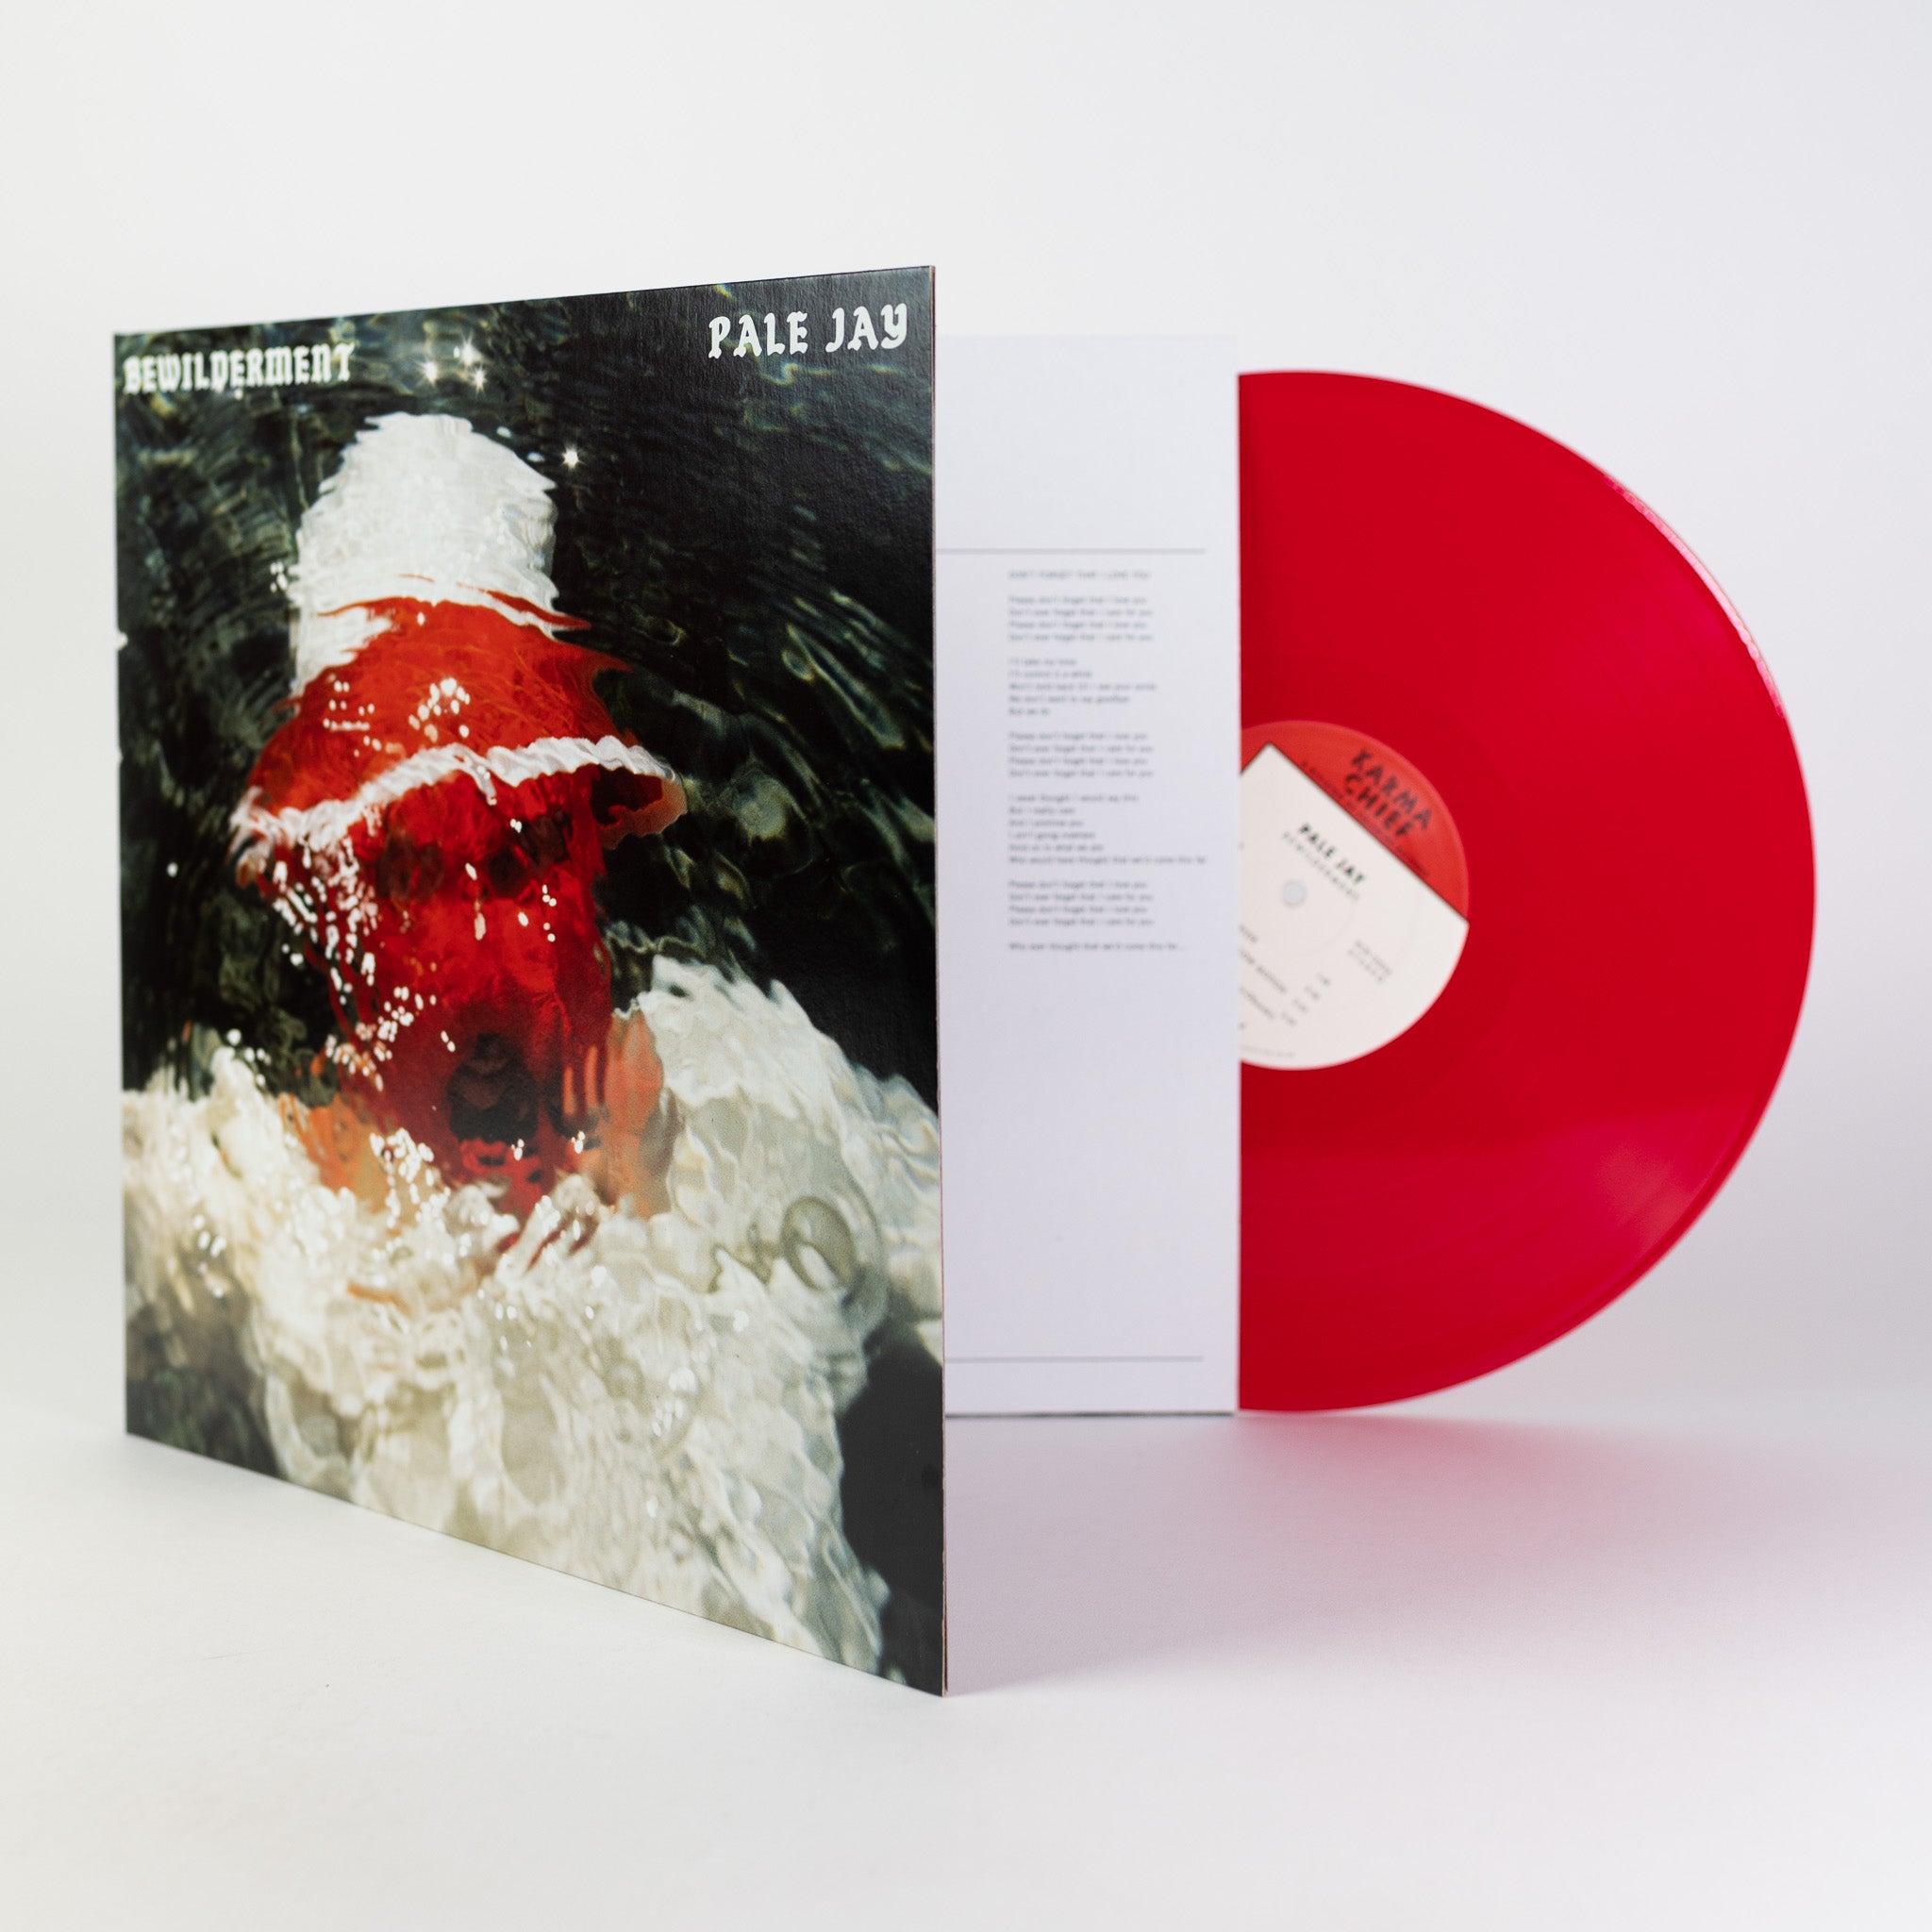 (self-titled) - Exclusive Opaque Red Vinyl